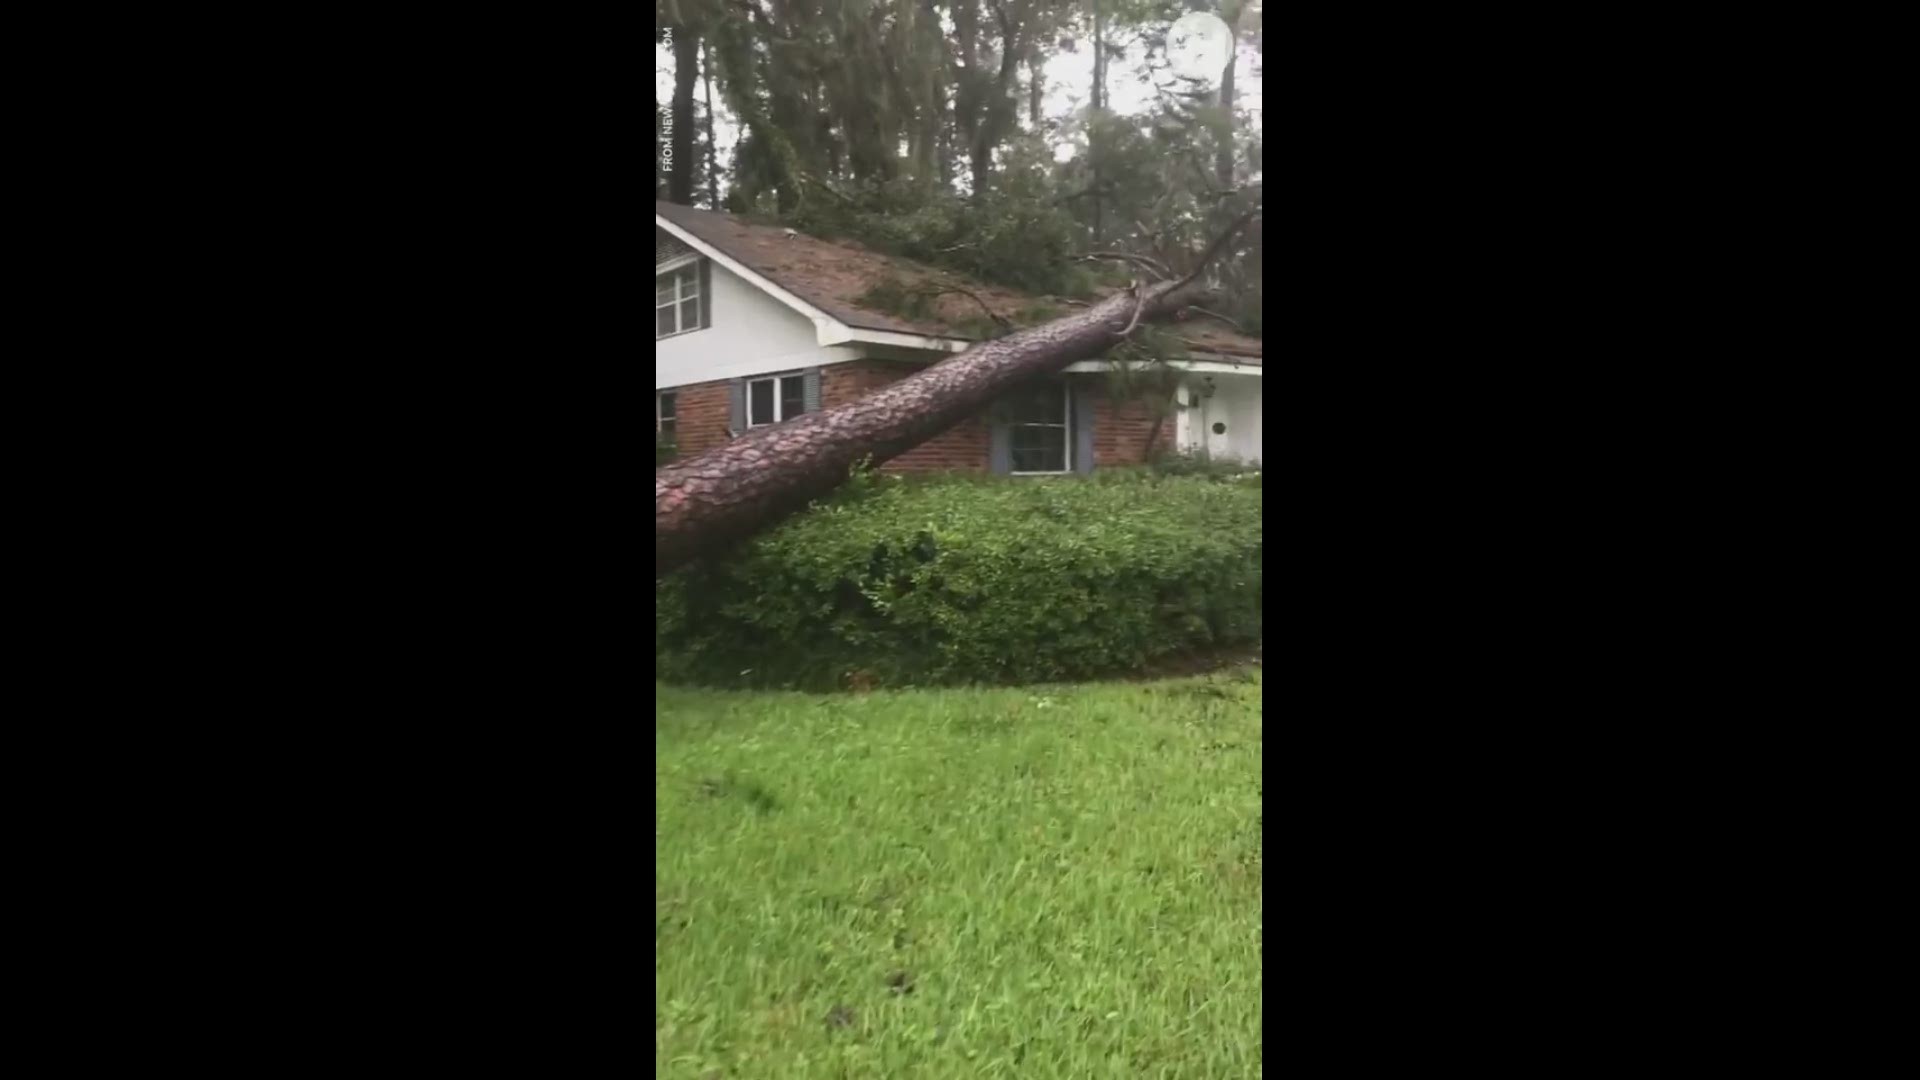 Hurricane Michael knocked down hundreds of trees on Wednesday in Tallahassee, Florida. (USA TODAY)